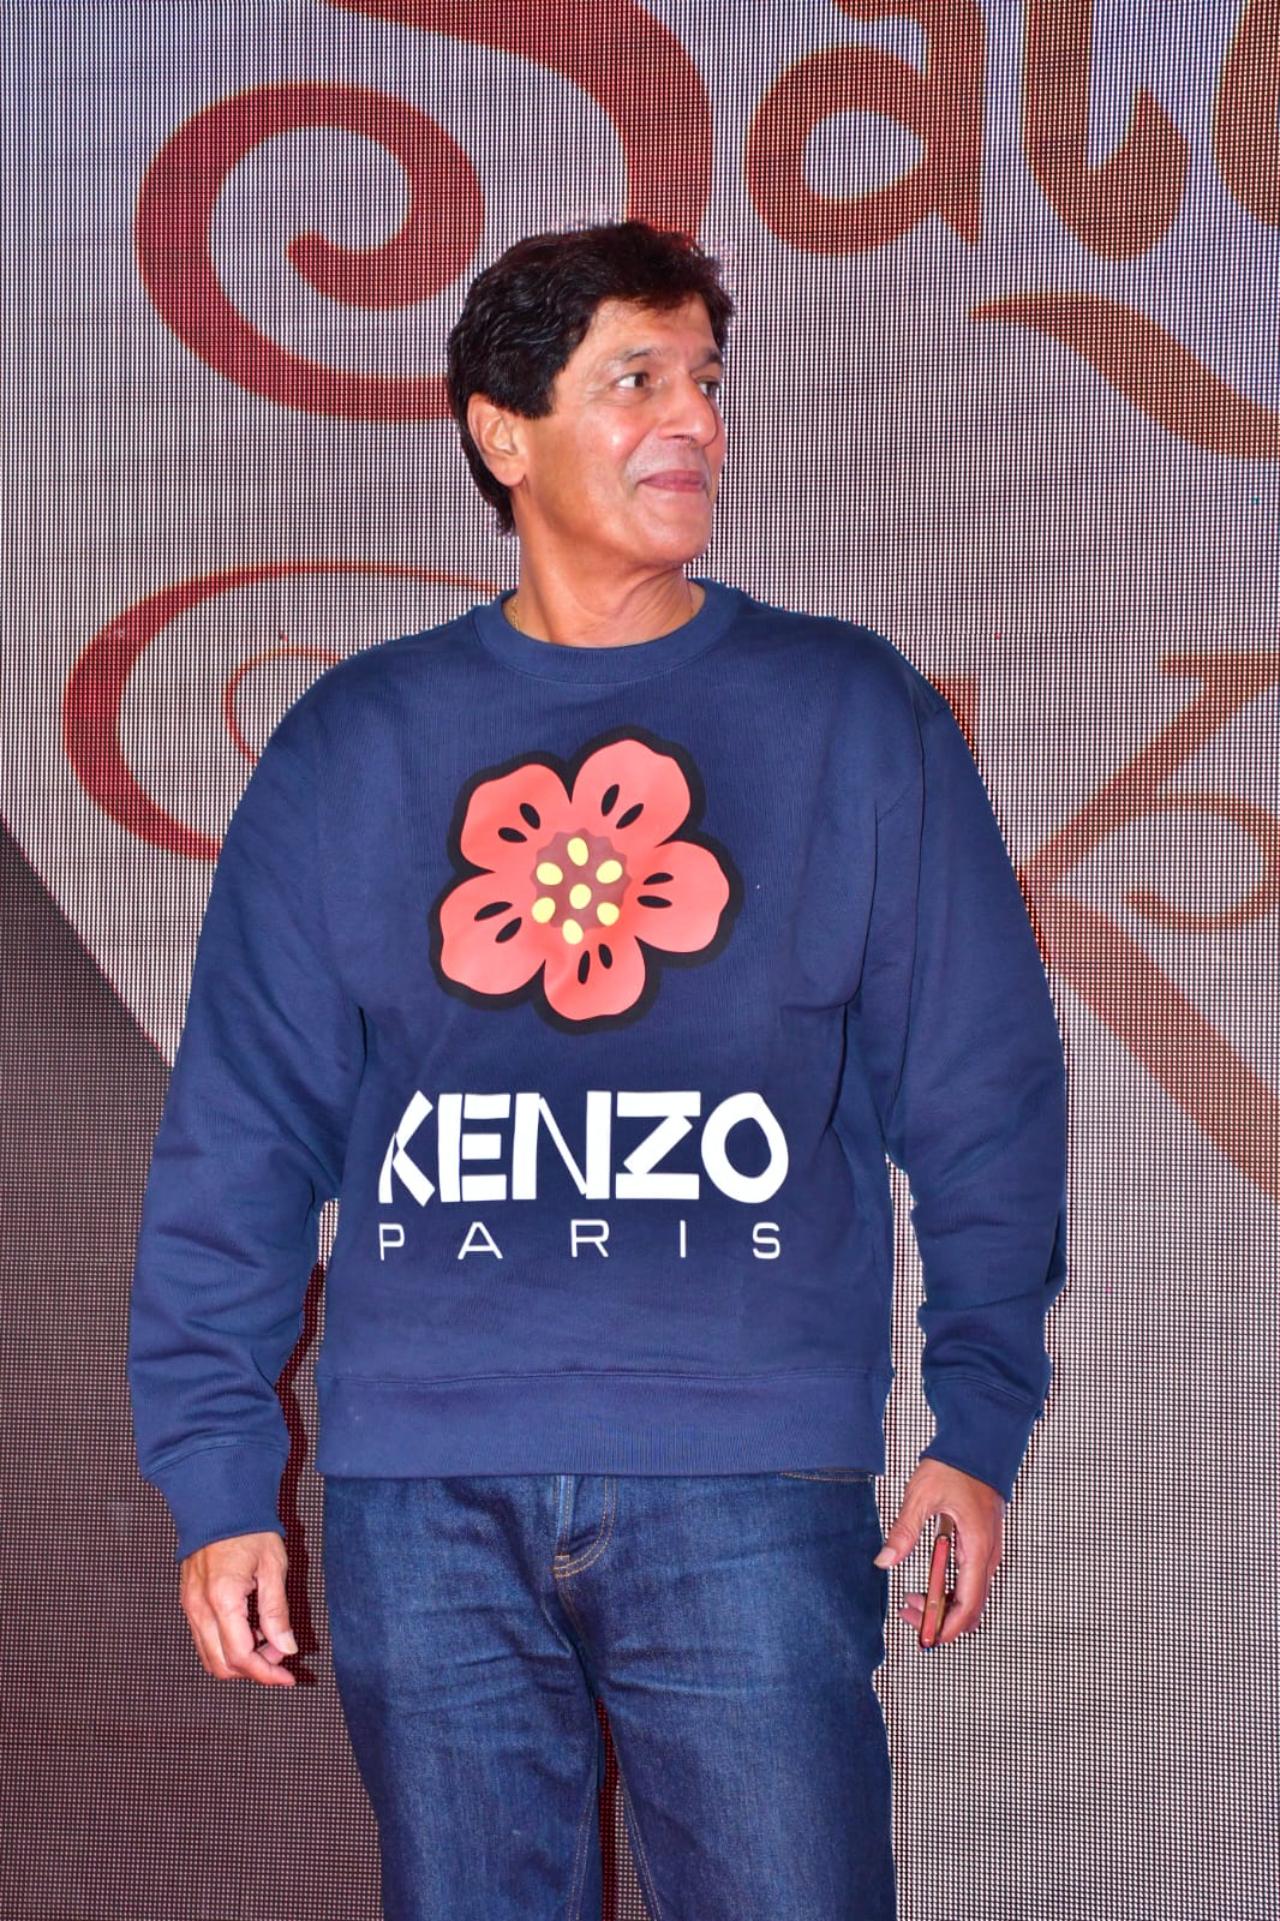 Chunky Pandey arrived solo at the screening of the film